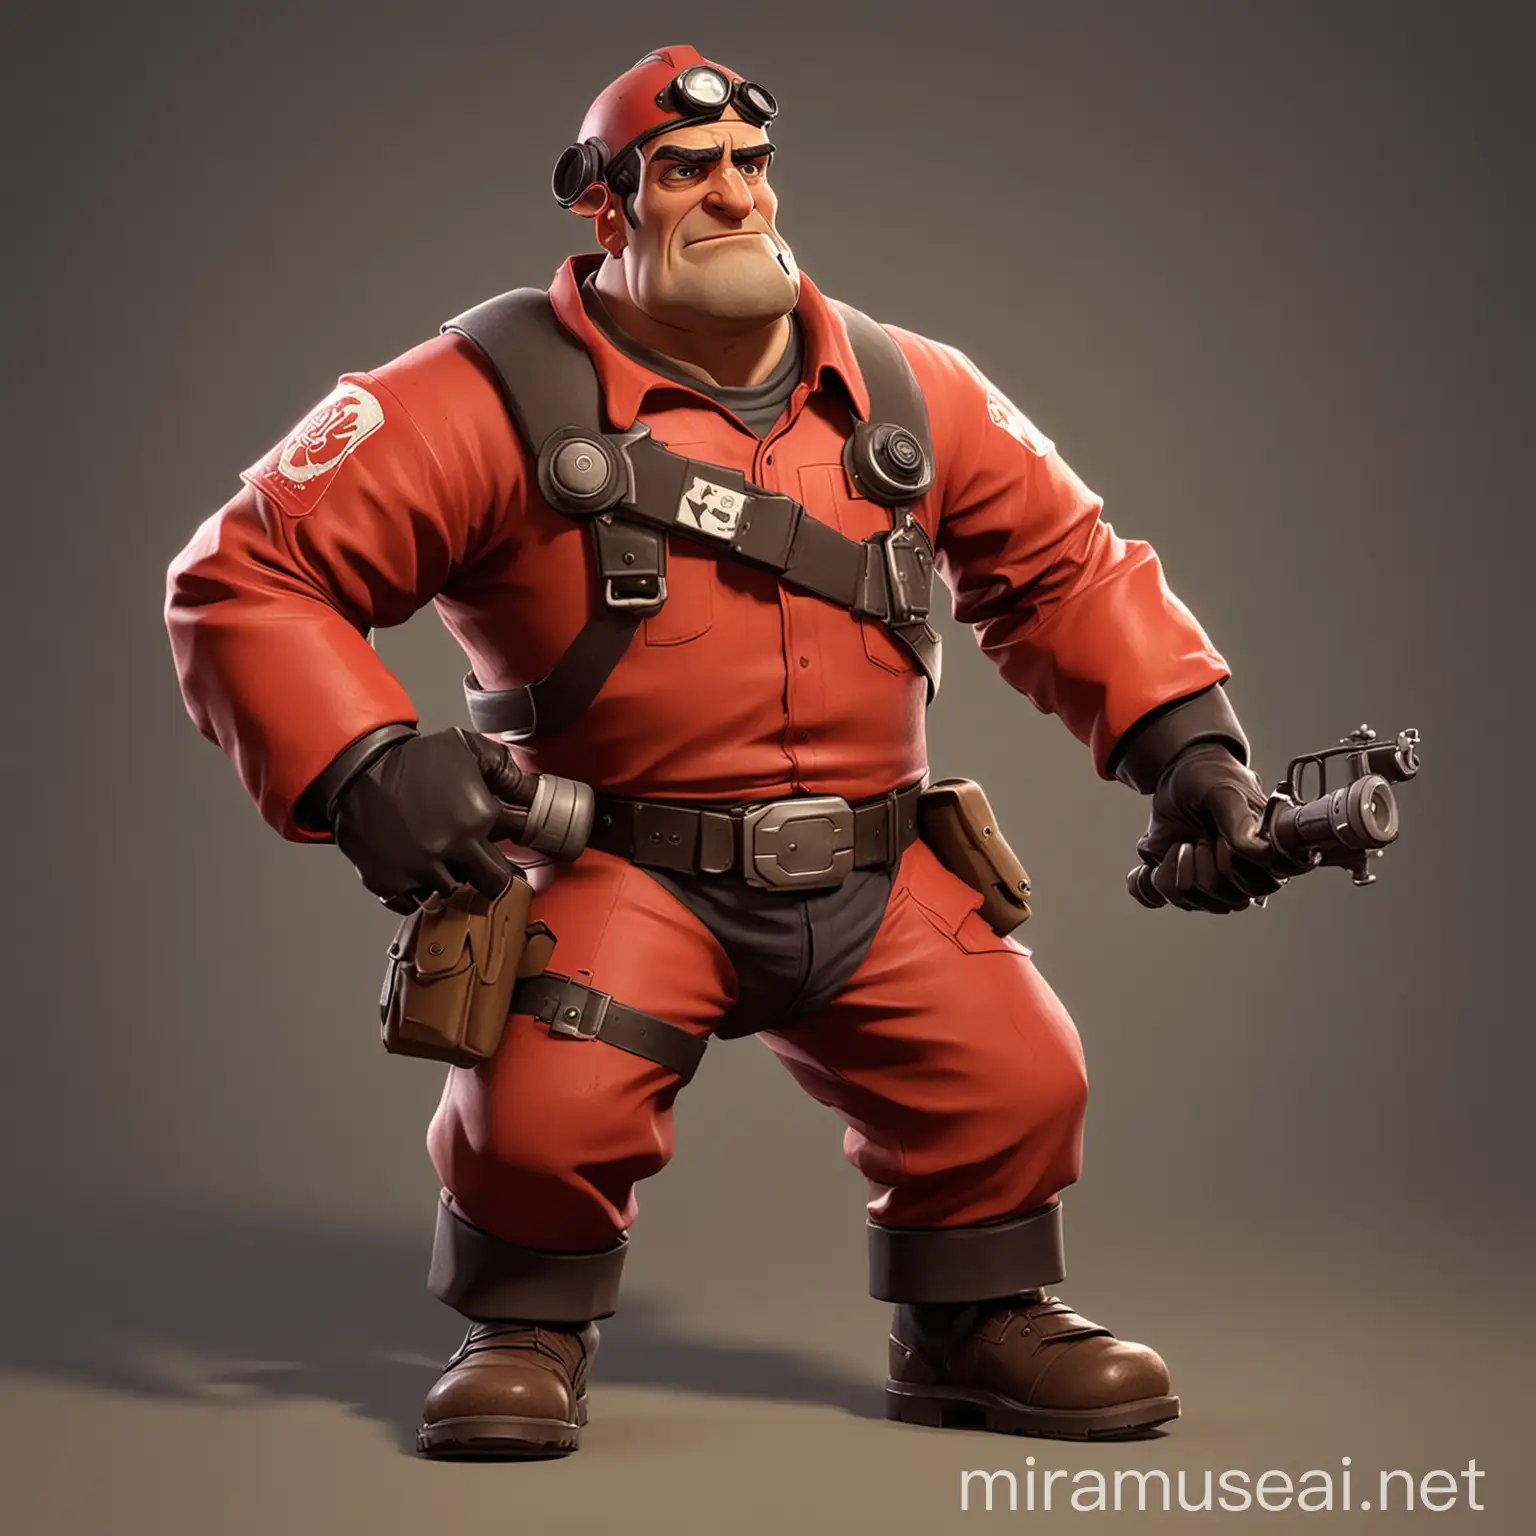 Cartoon Red Engineer from TF2 Video Game